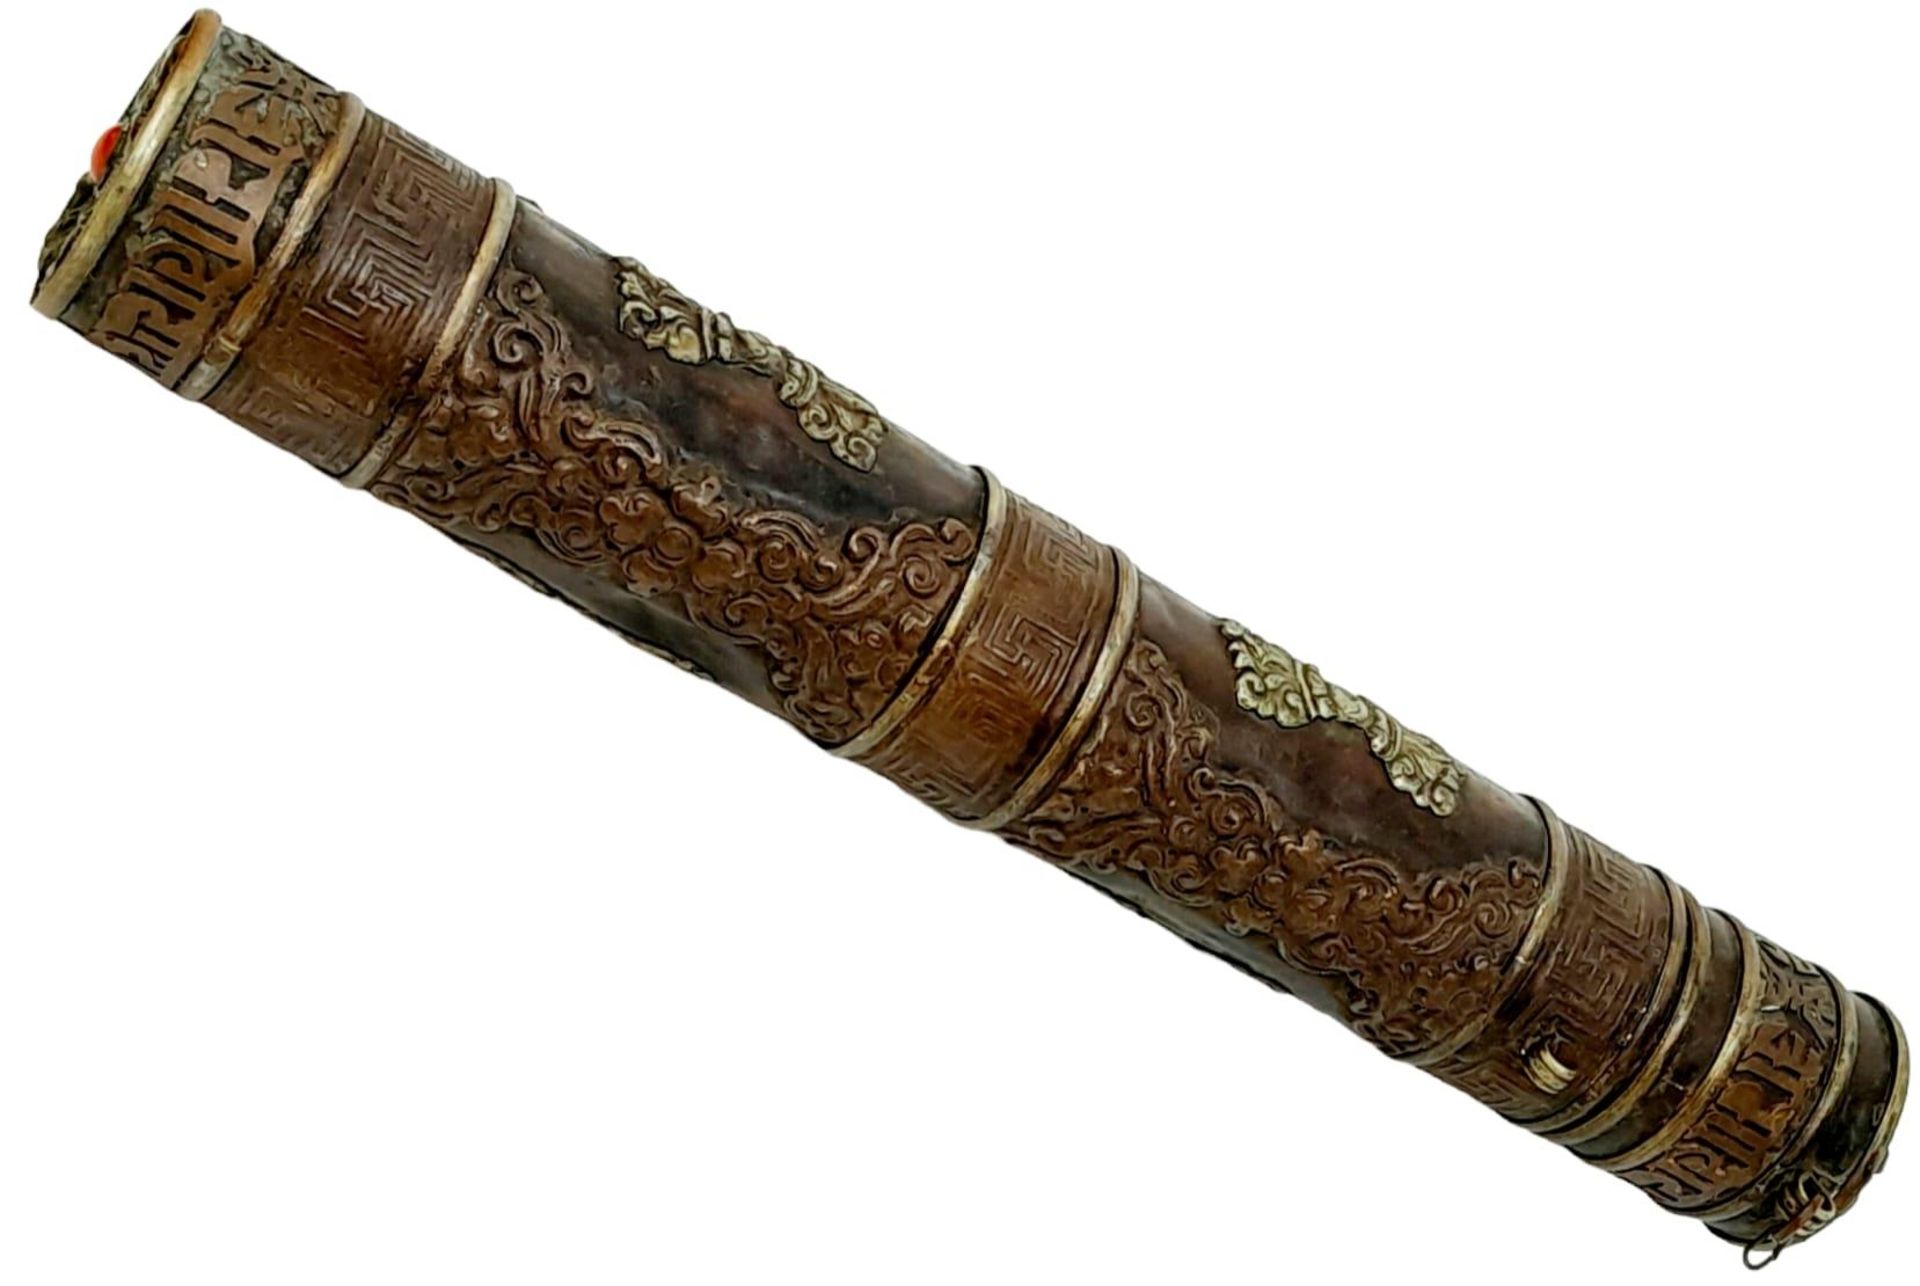 A Bronzed/Copper Tibetan Scroll Holder. Set with Cabochons Top and Bottom and Measures 35cm Length - Image 2 of 4